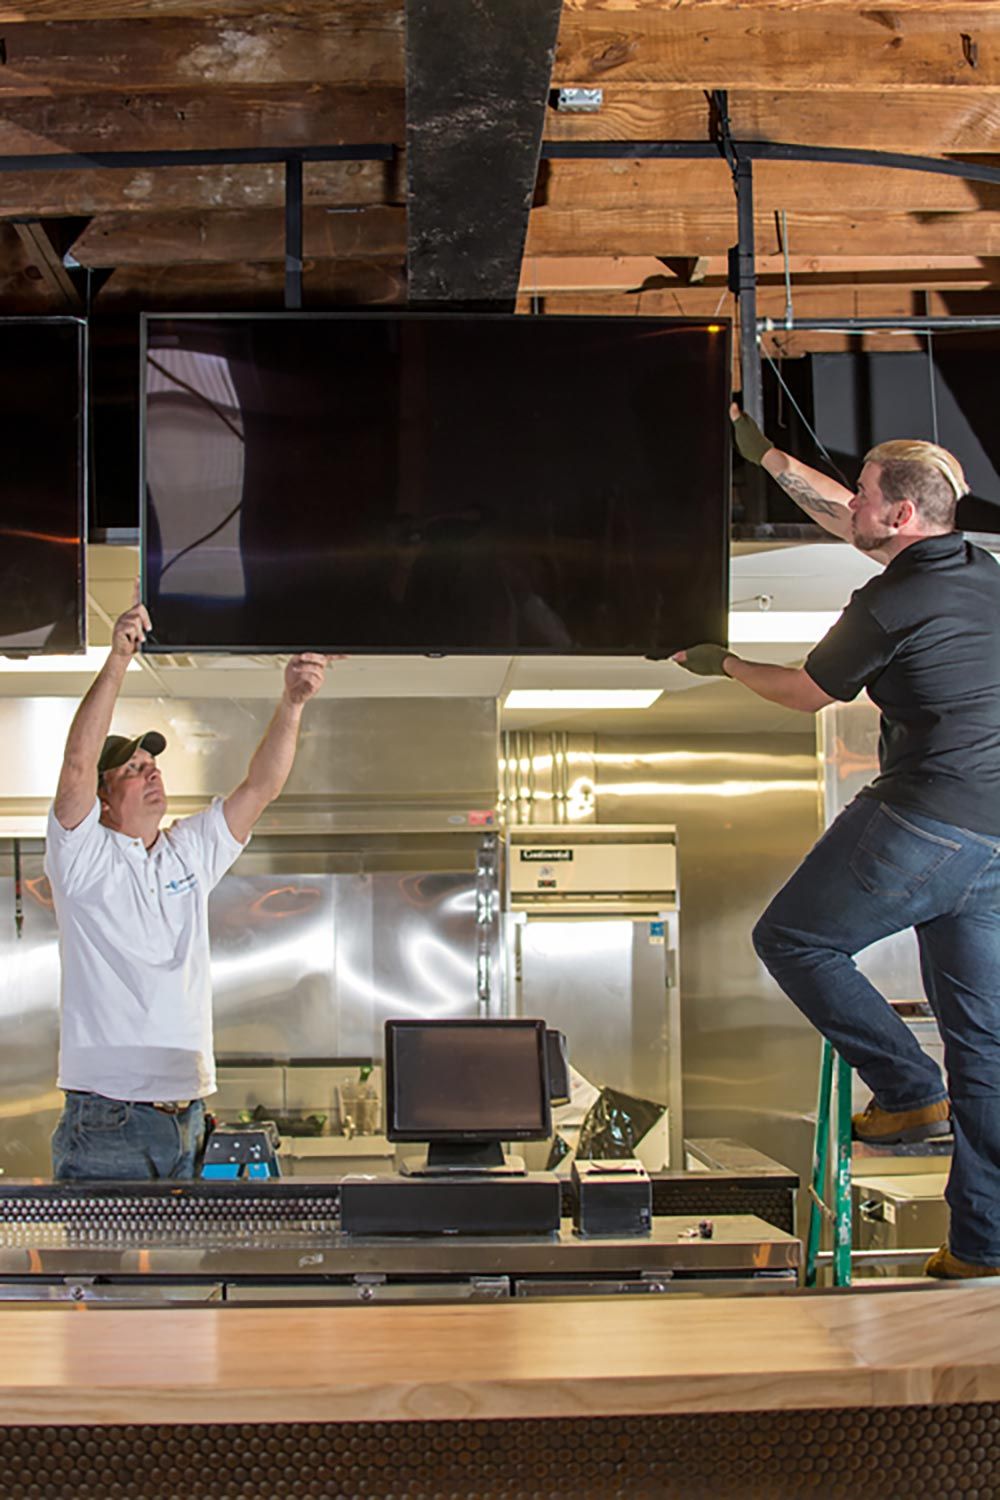 One Source Project Managers hanging a TV in a kitchen